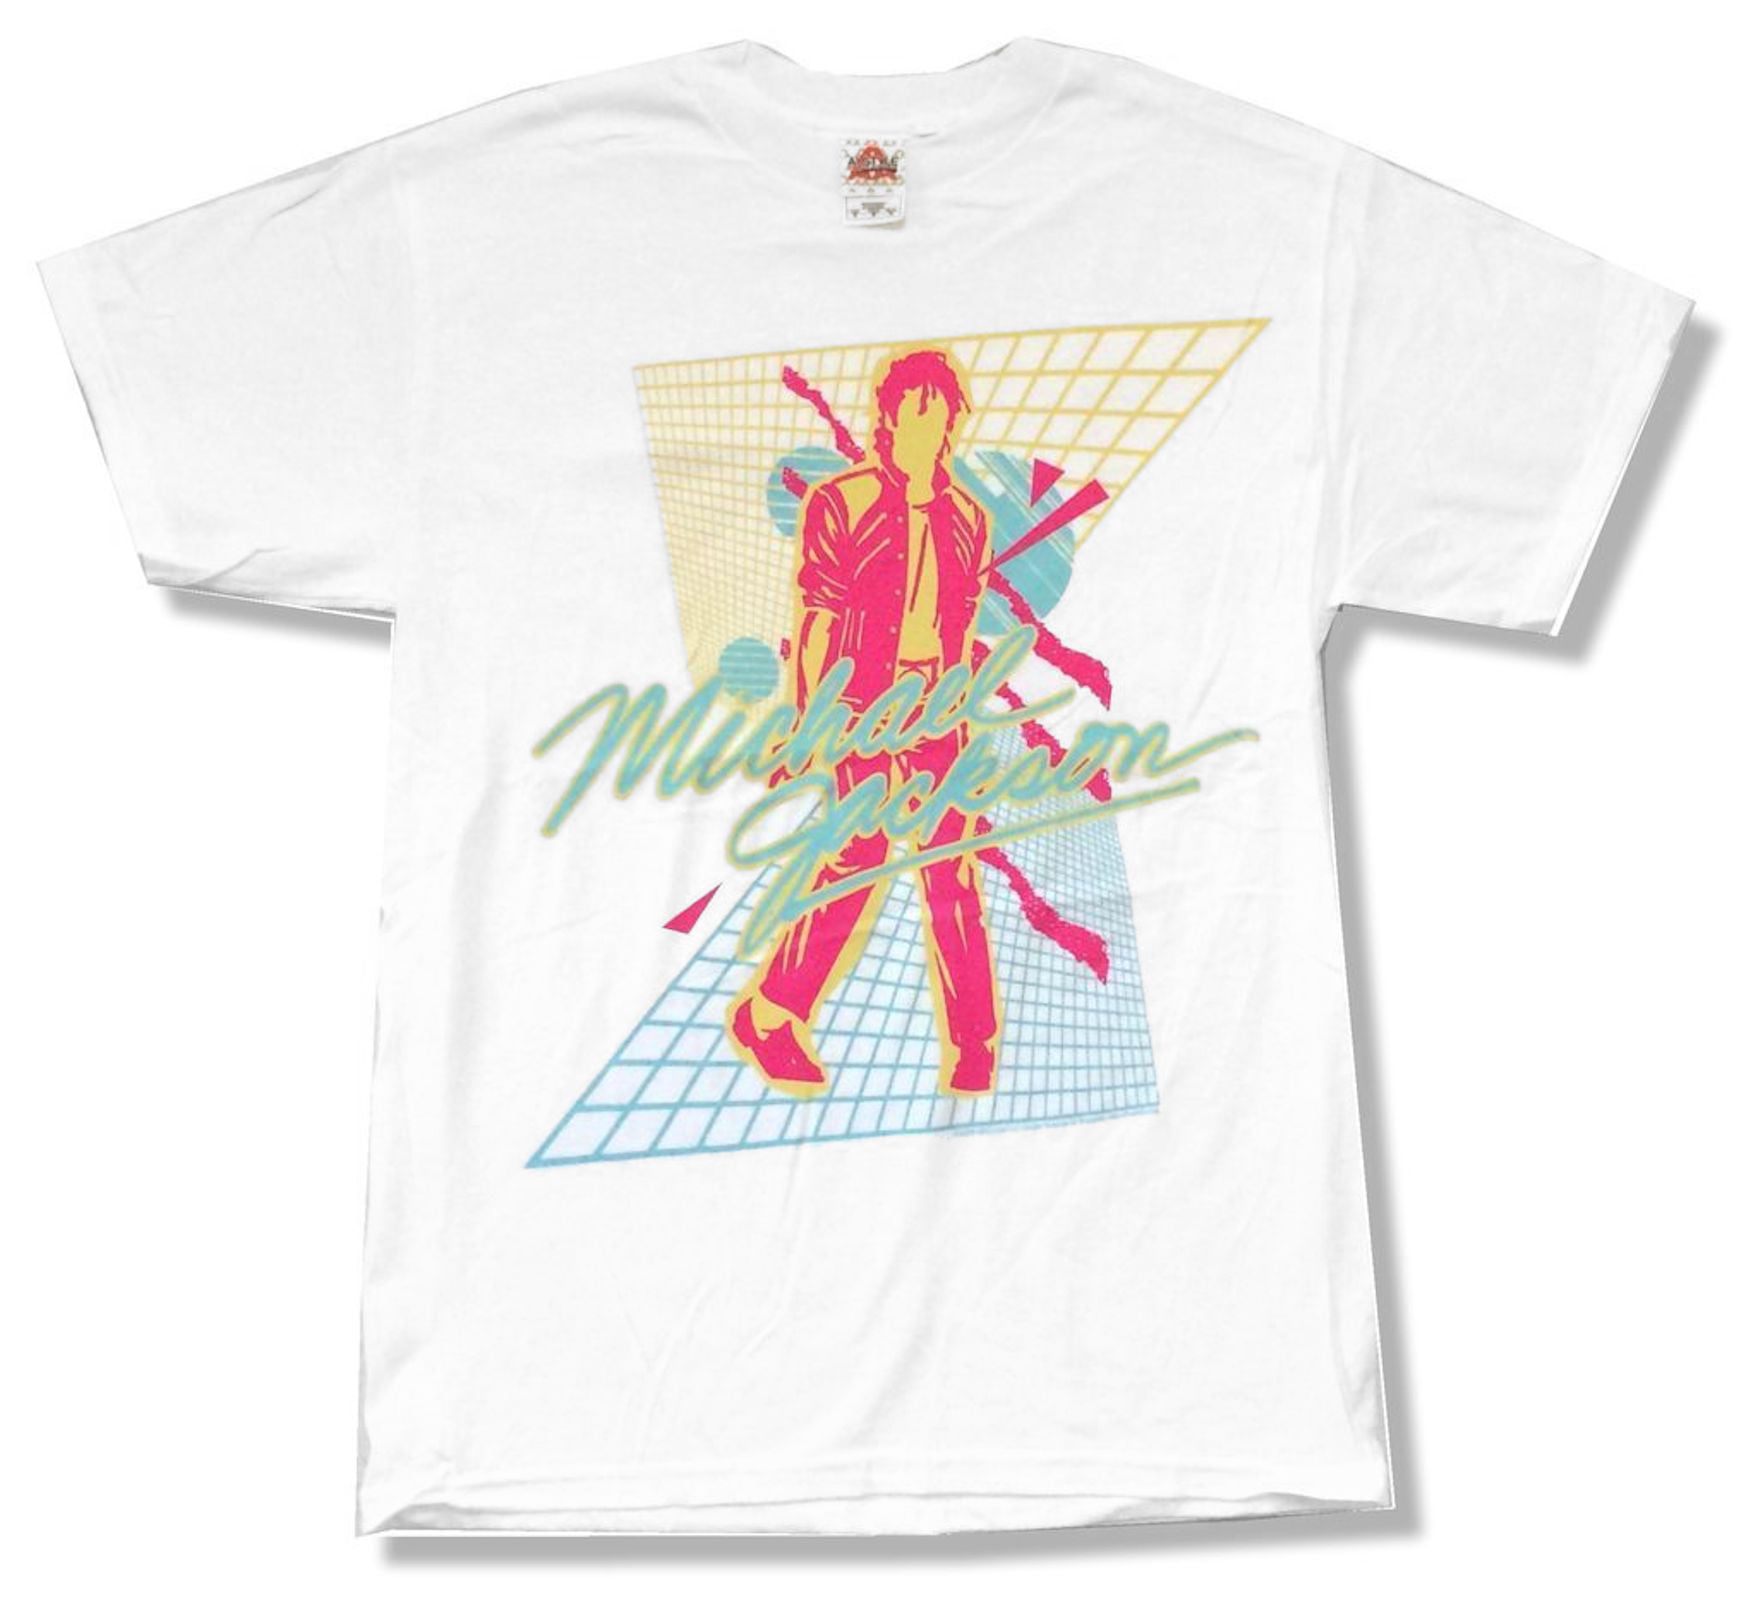 Cheapest Delivered X-Large Michael Jackson Beat It T-Shirt 